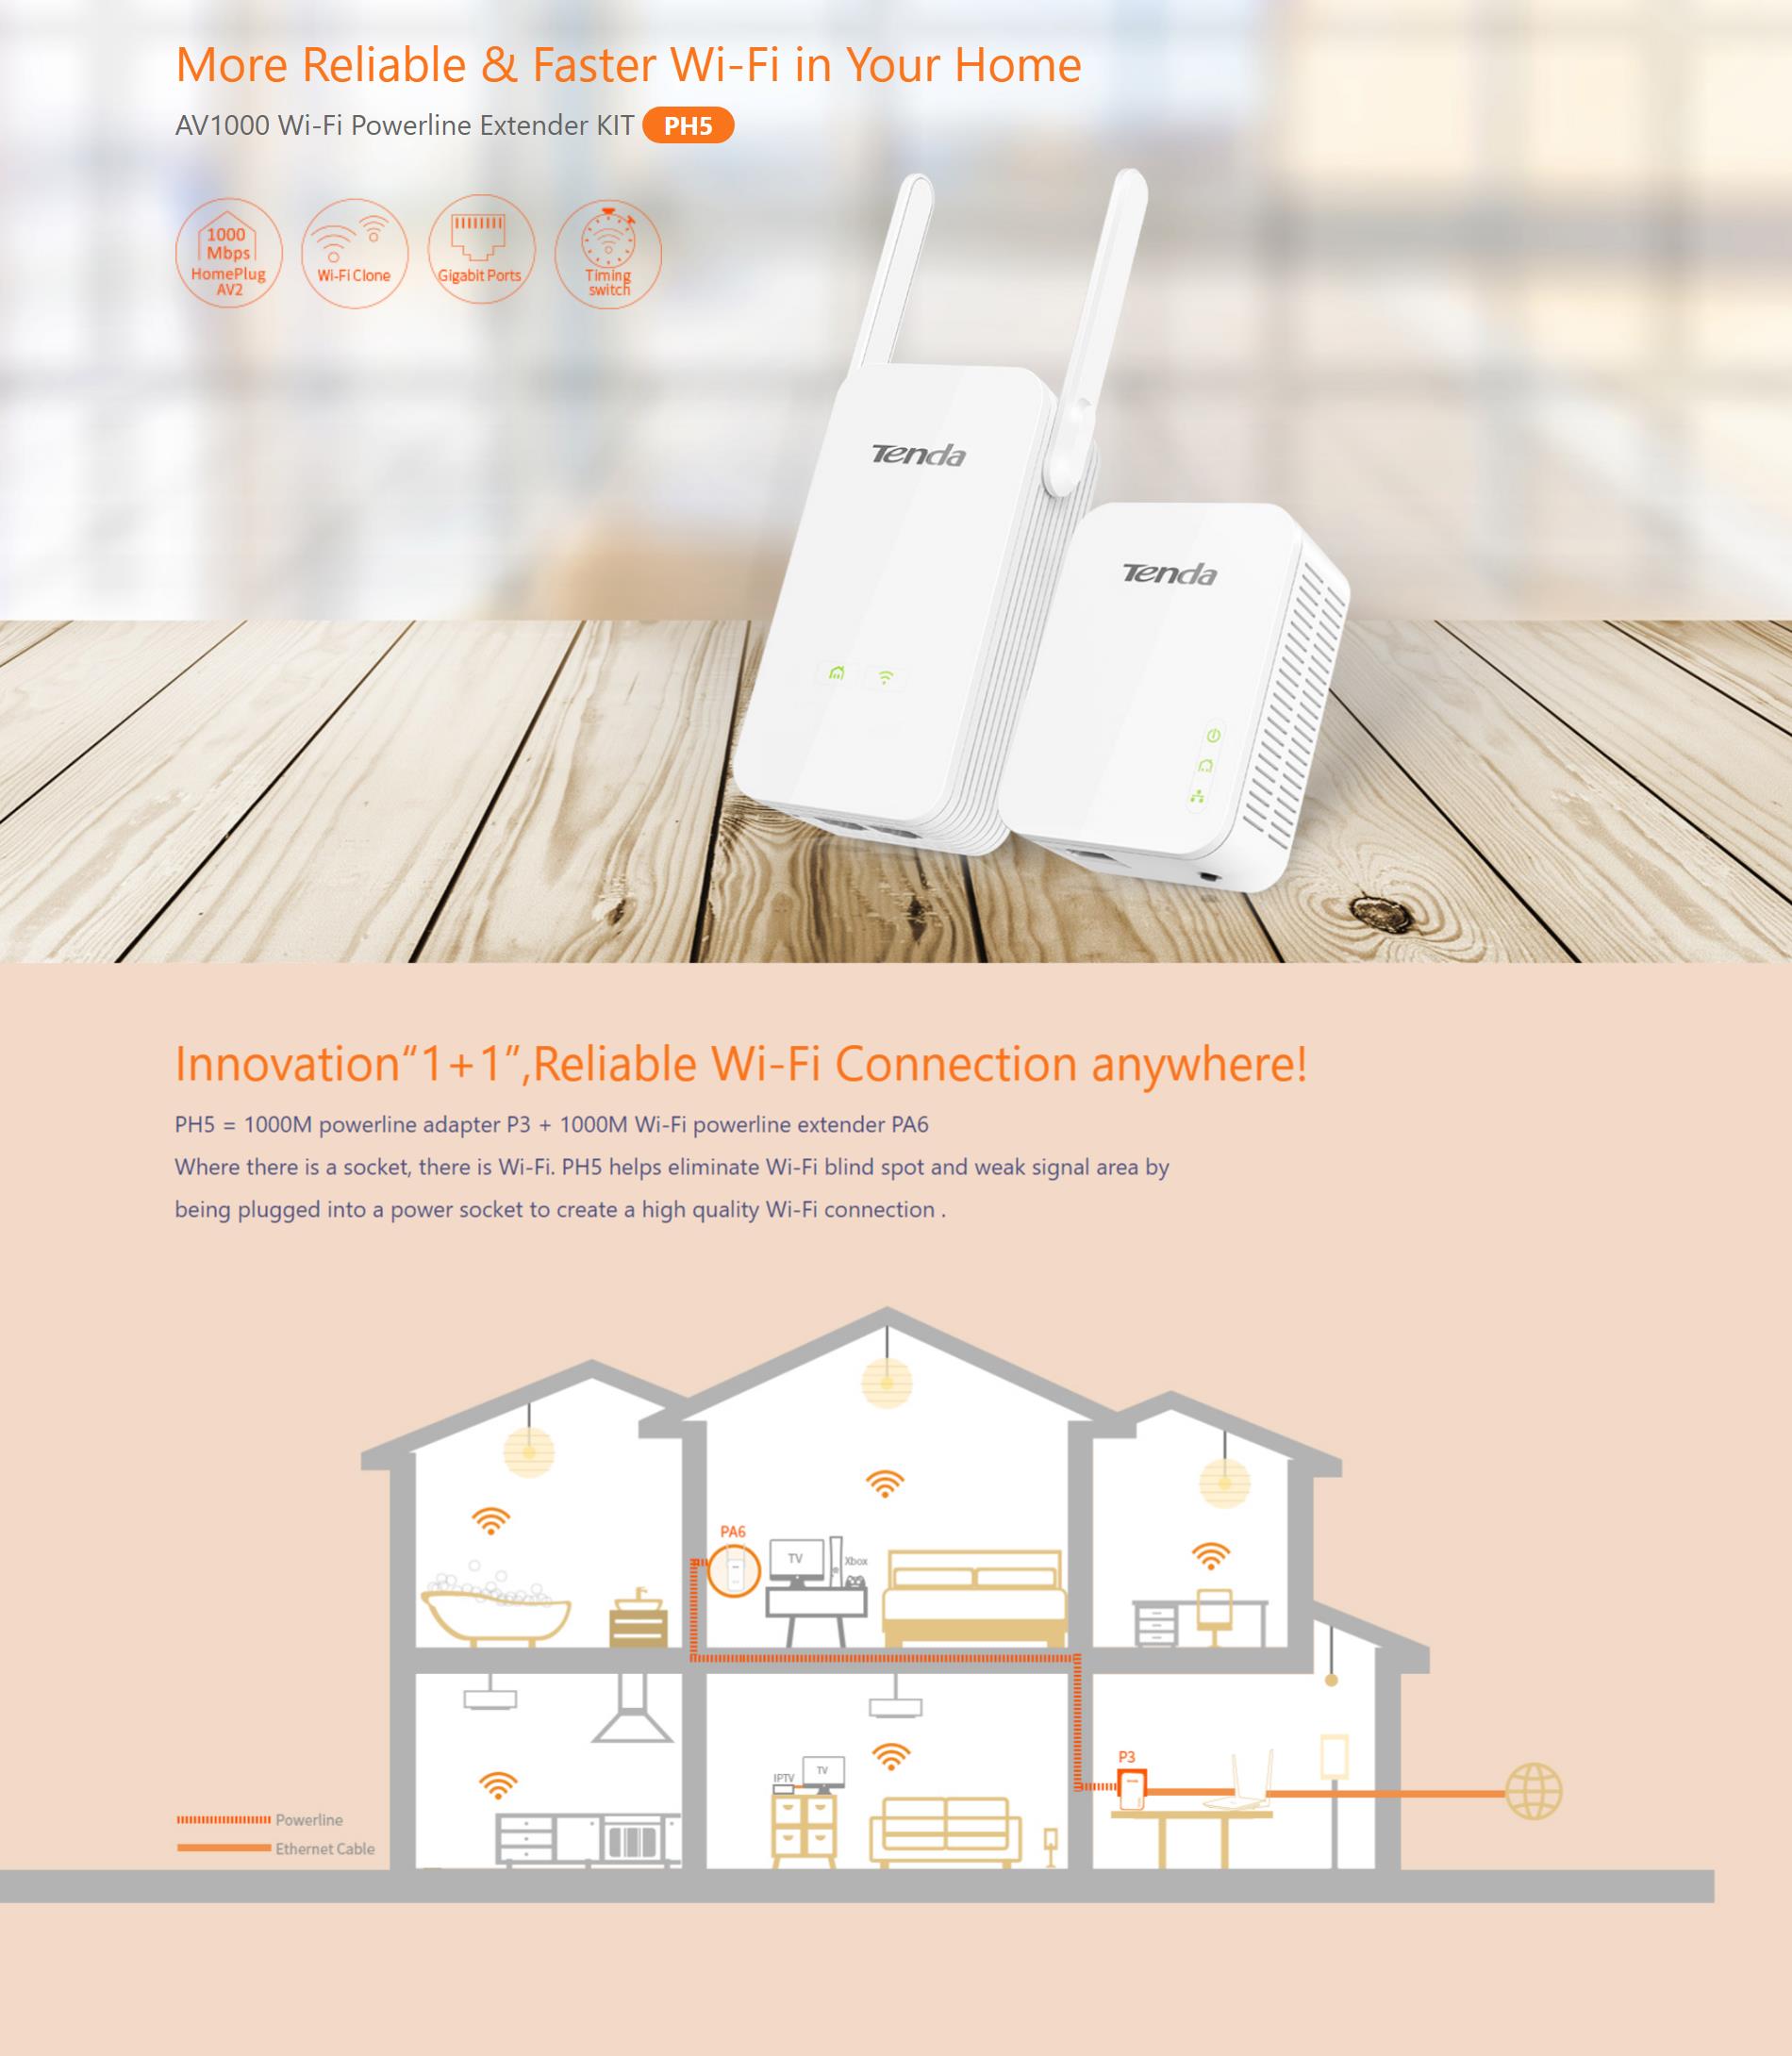 A large marketing image providing additional information about the product Tenda PH5 AV1000 Wi-Fi Powerline Extender Kit - Additional alt info not provided